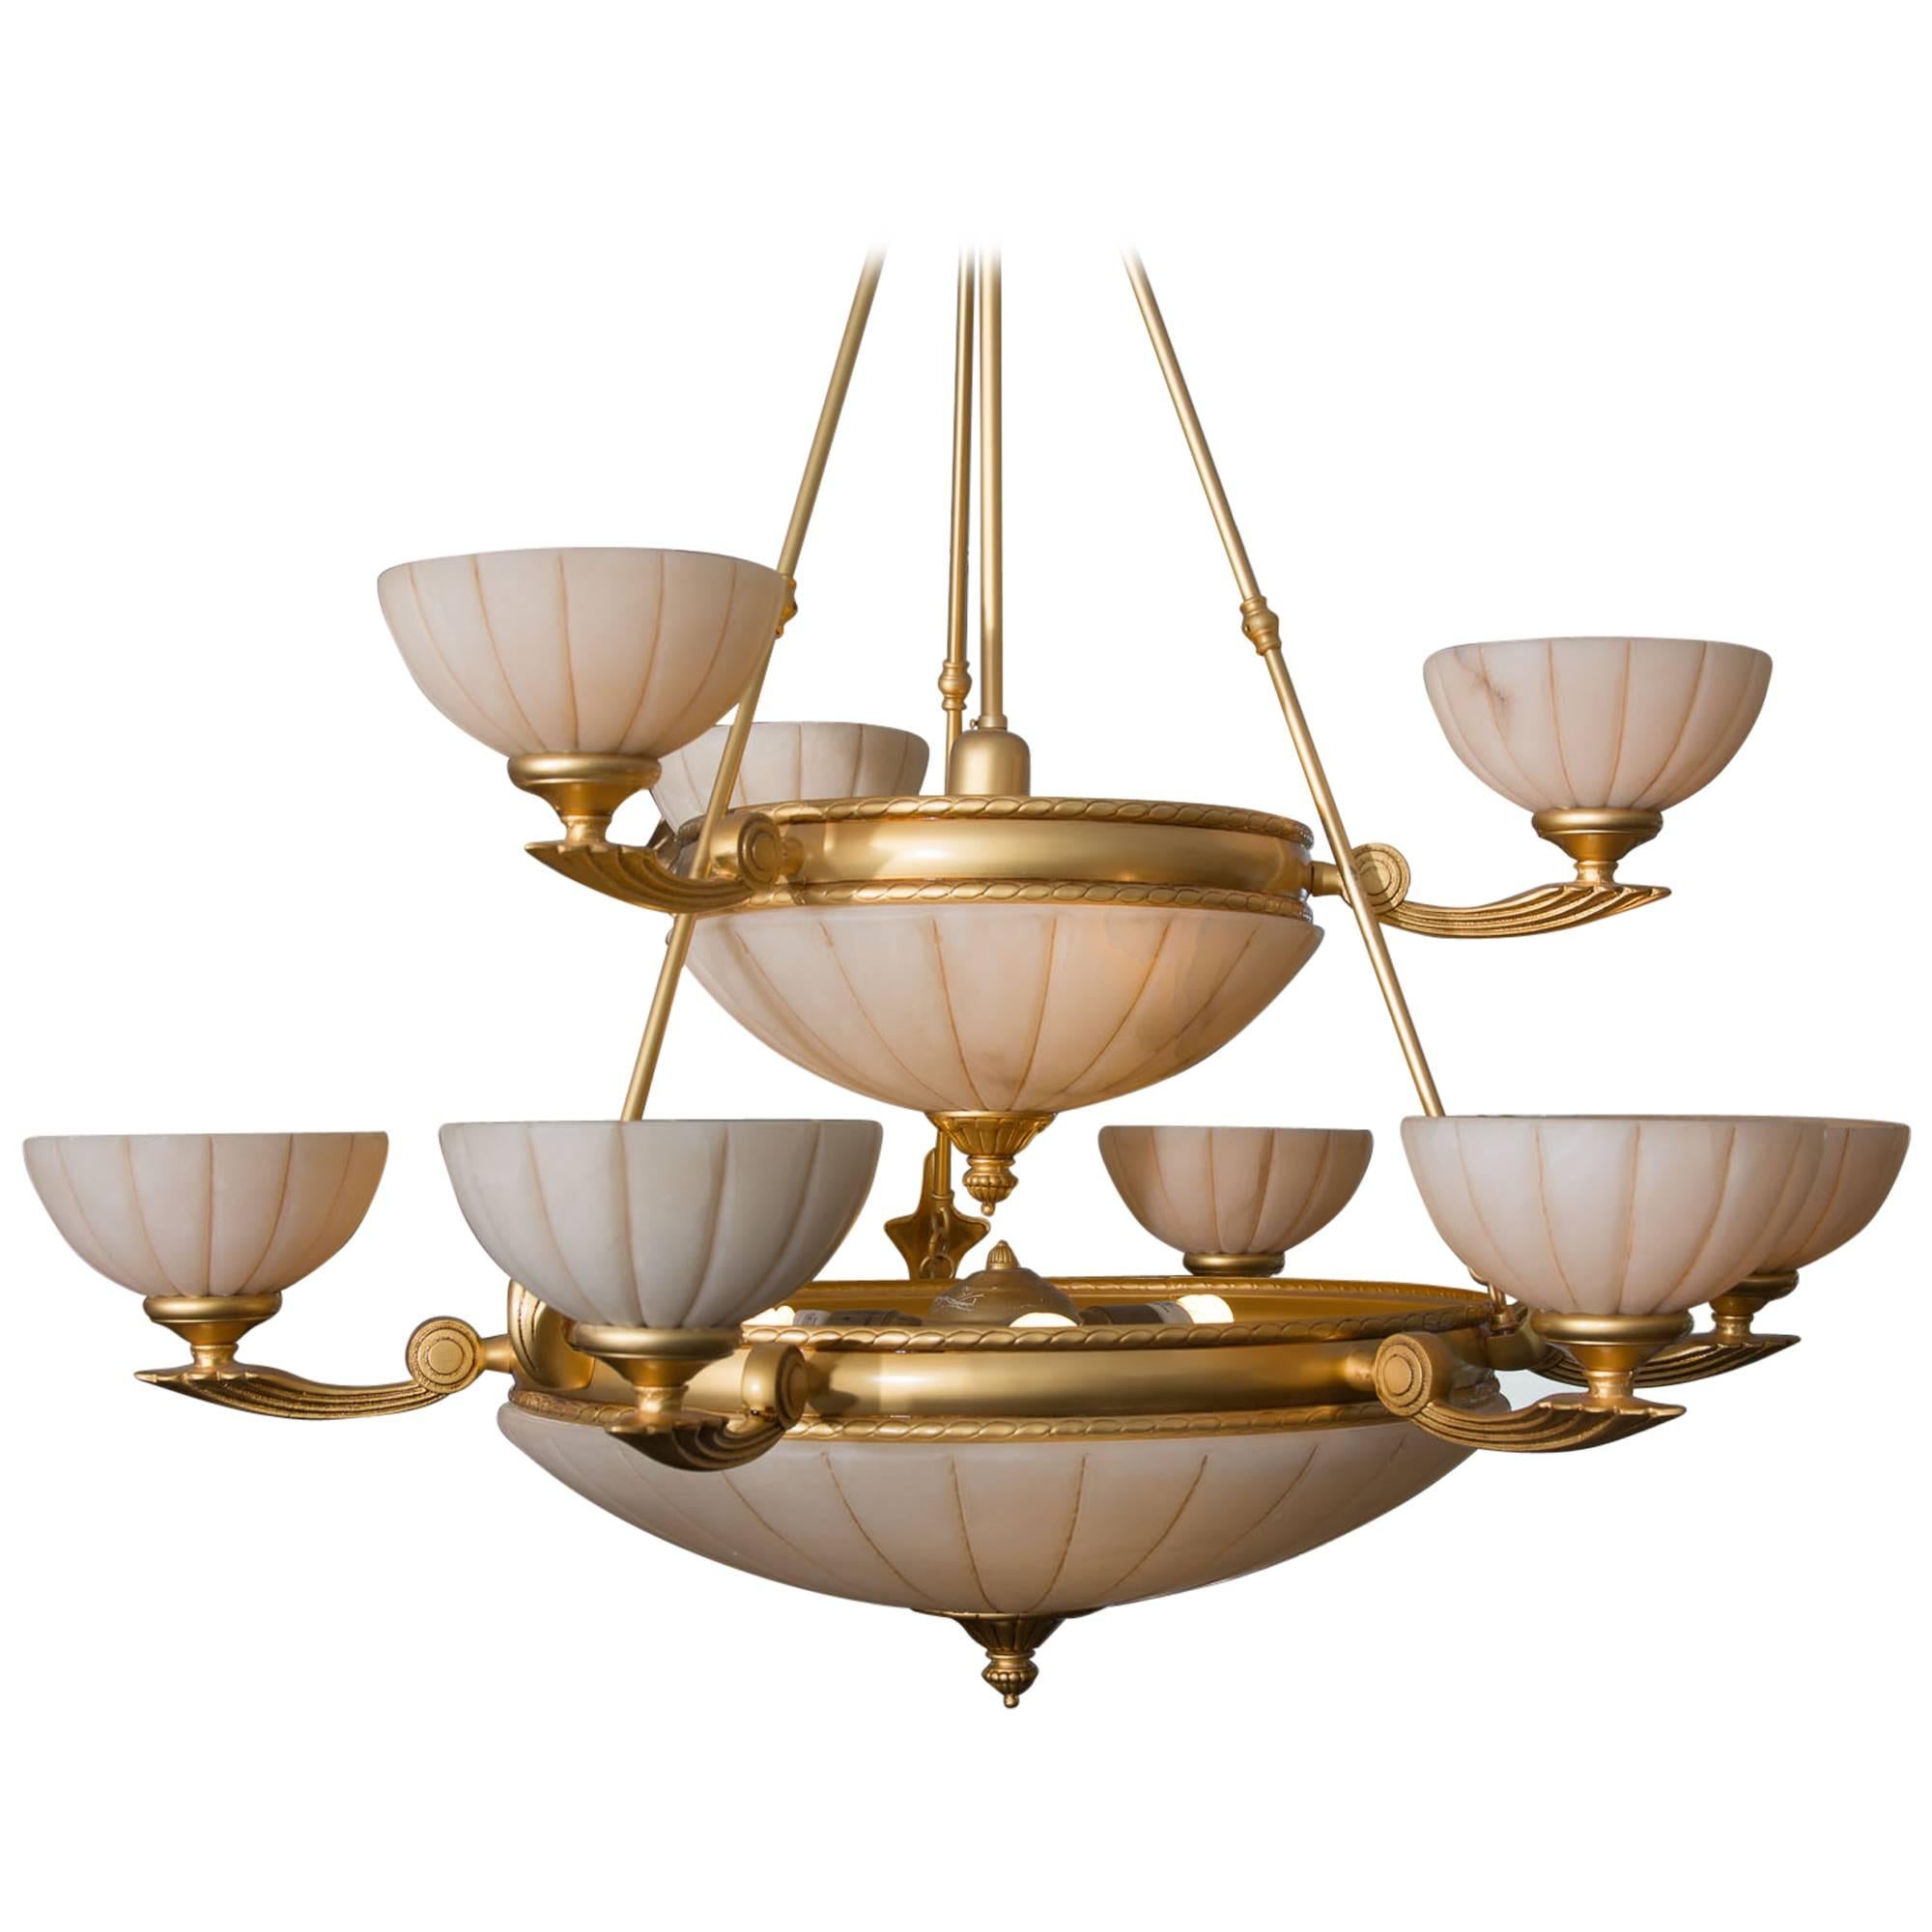 Contemporary Chandelier with Empire Influence